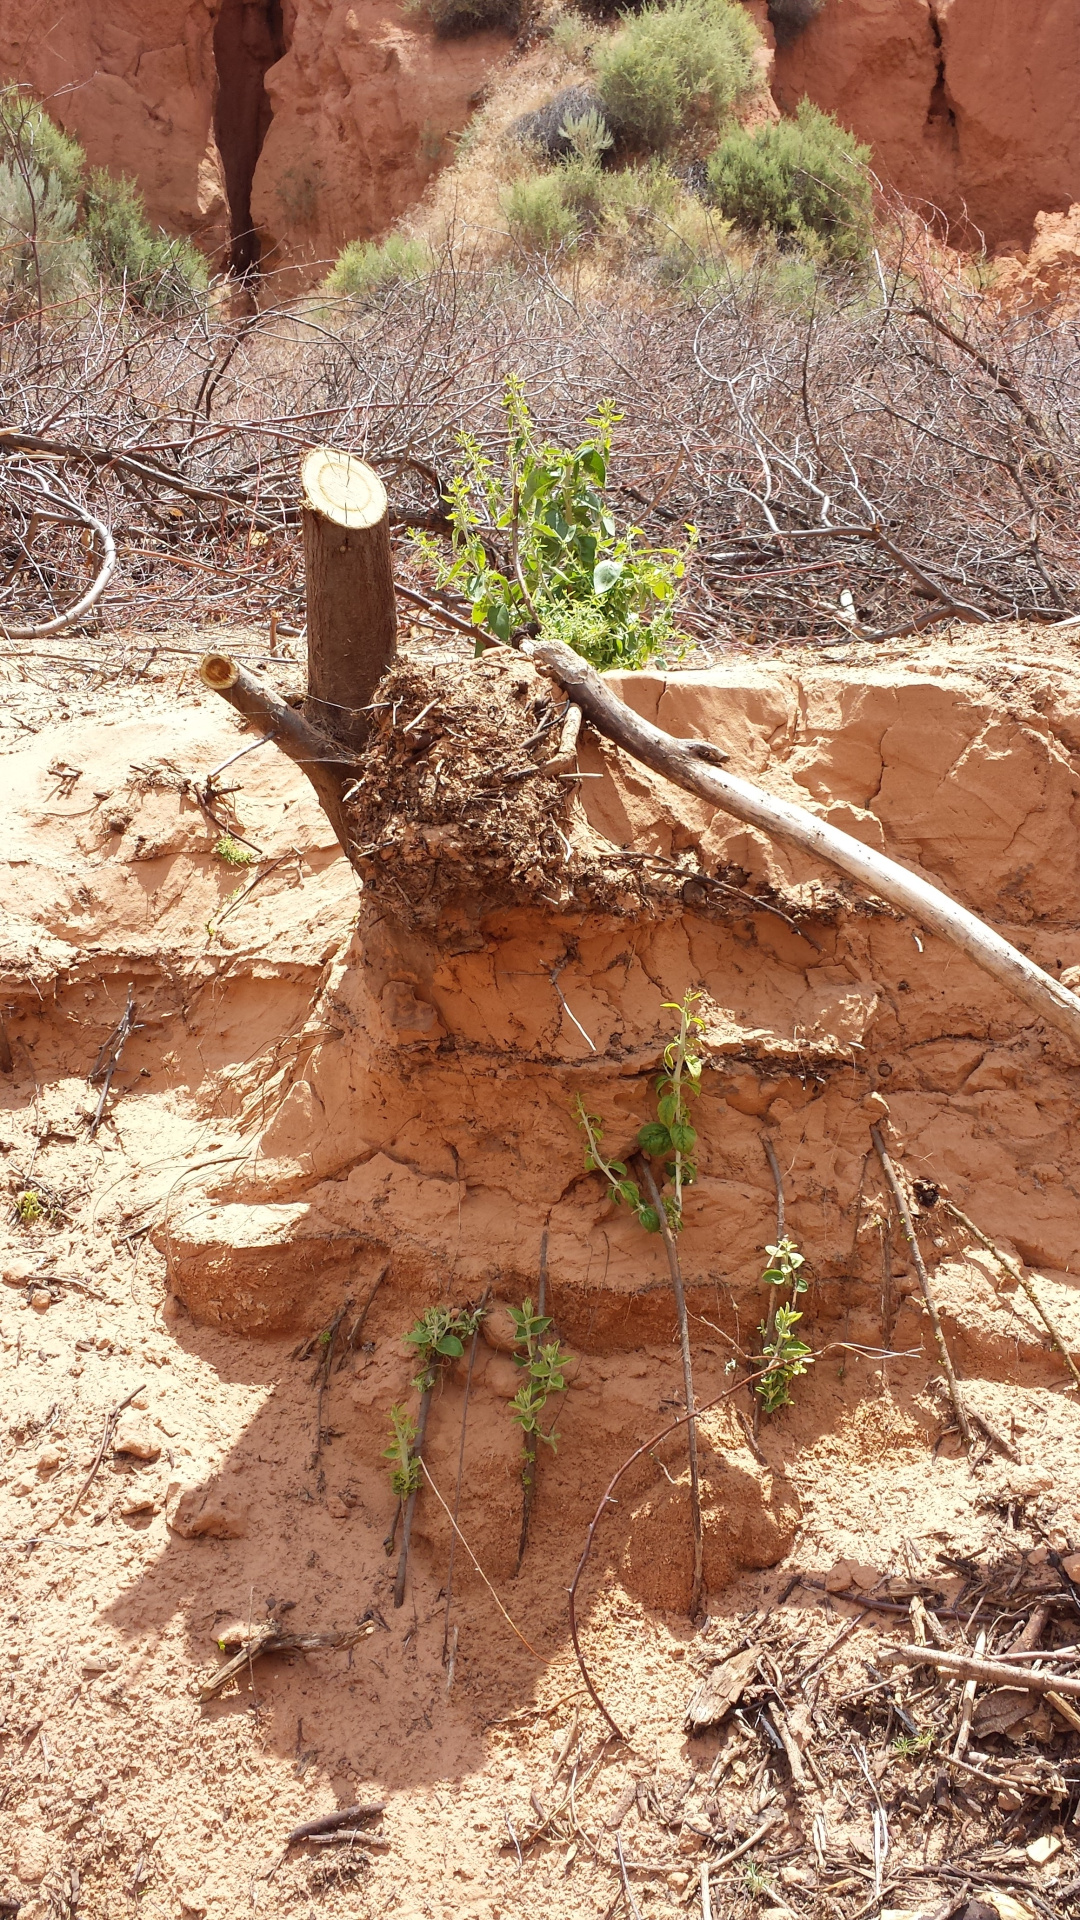 Sapling tree that was growing in a cut bank with its roots exposed, has been cut 6-10 inches from its base as part of a tree removal project.